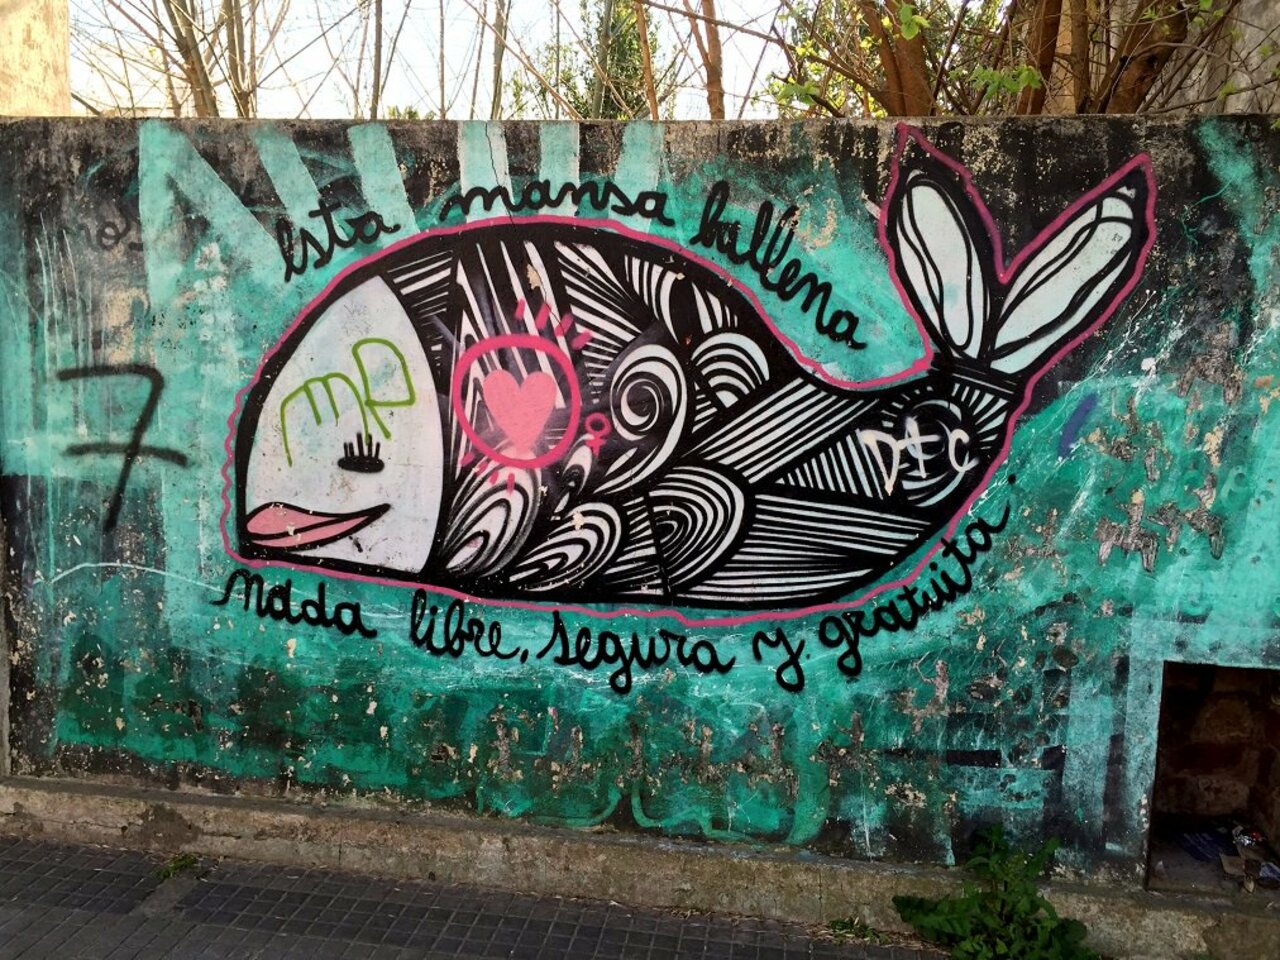 RT @DickieRandrup: #Graffiti de hoy: « This docile whale swims free, safe and idle...» Calle11 65y66 #LaPlata #Argentina #StreetArt https://t.co/32YlAHXExf